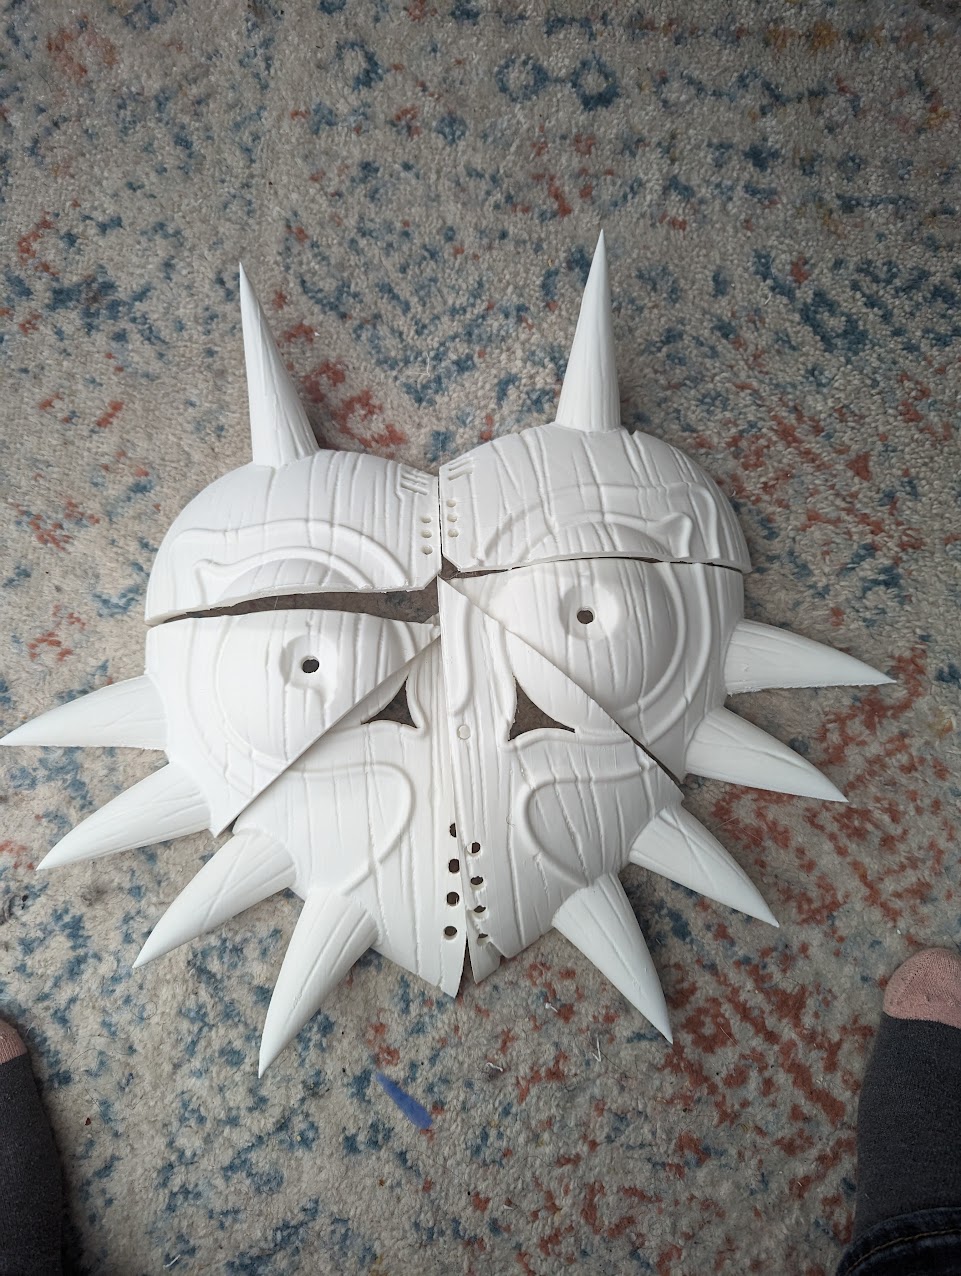 A picture of Majoras Mask, seperated in 6 pieces